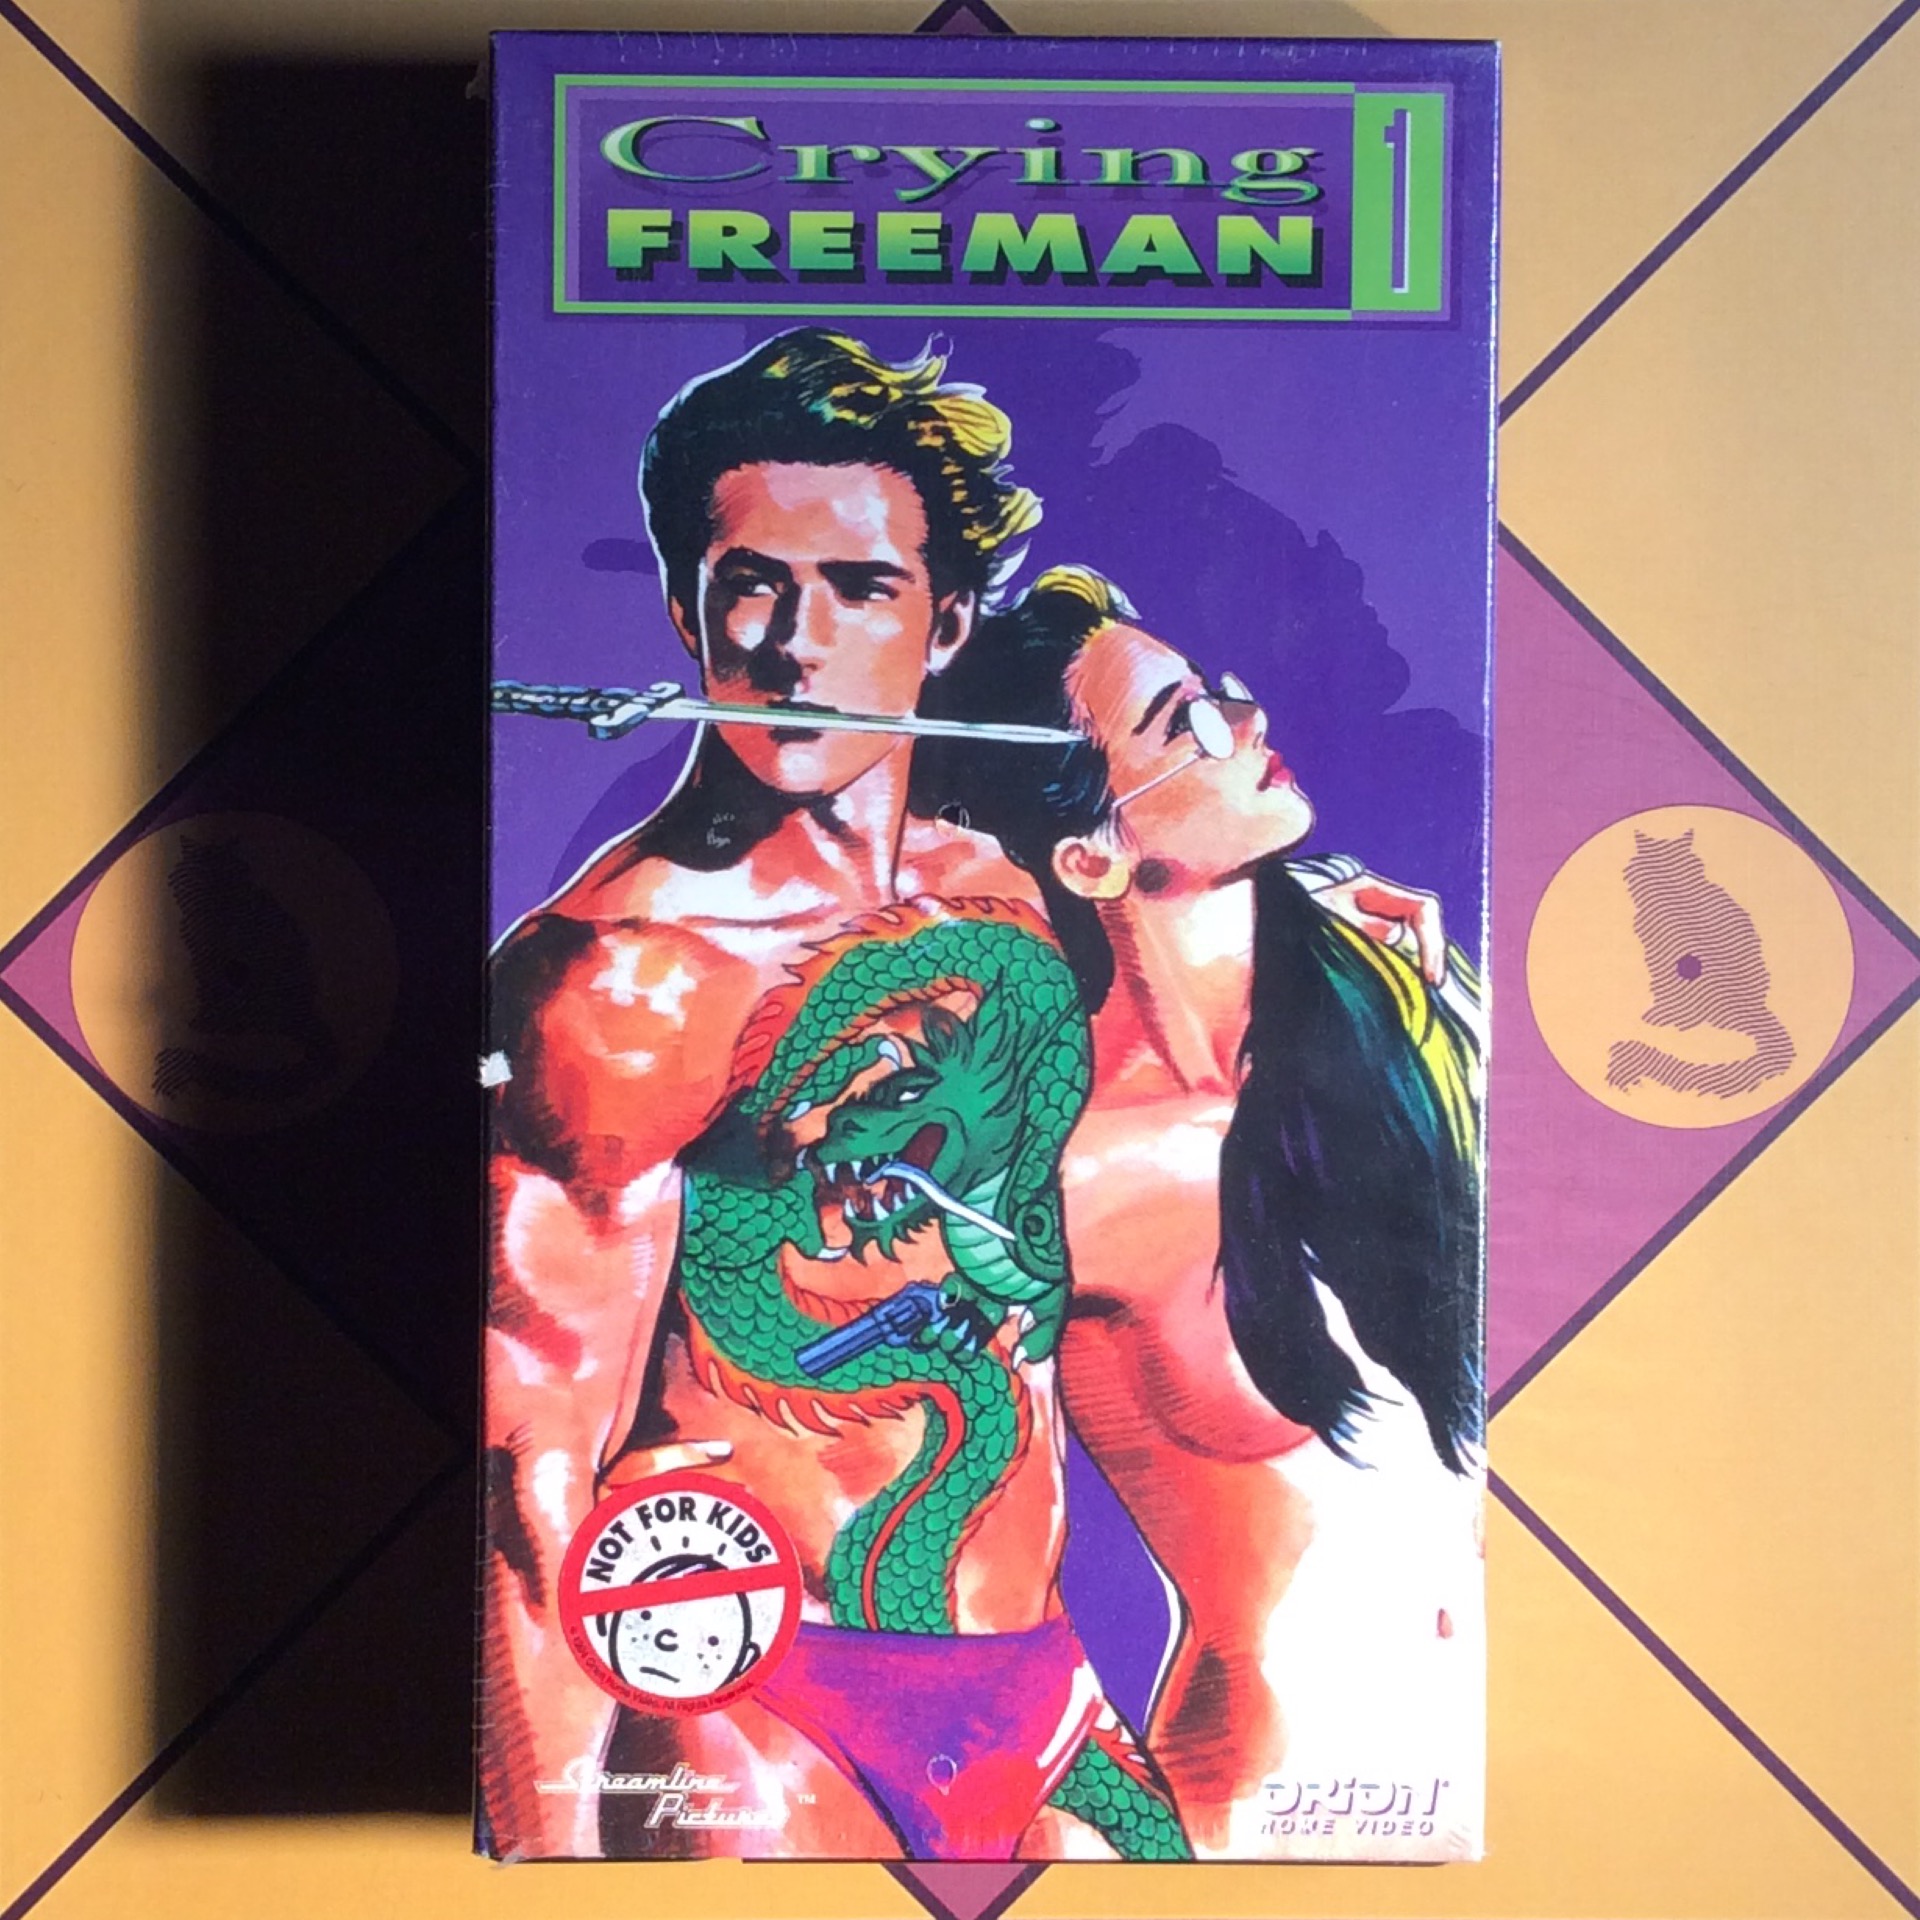 Crying+Freeman+Complete+Collection+%28DVD%29 for sale online | eBay